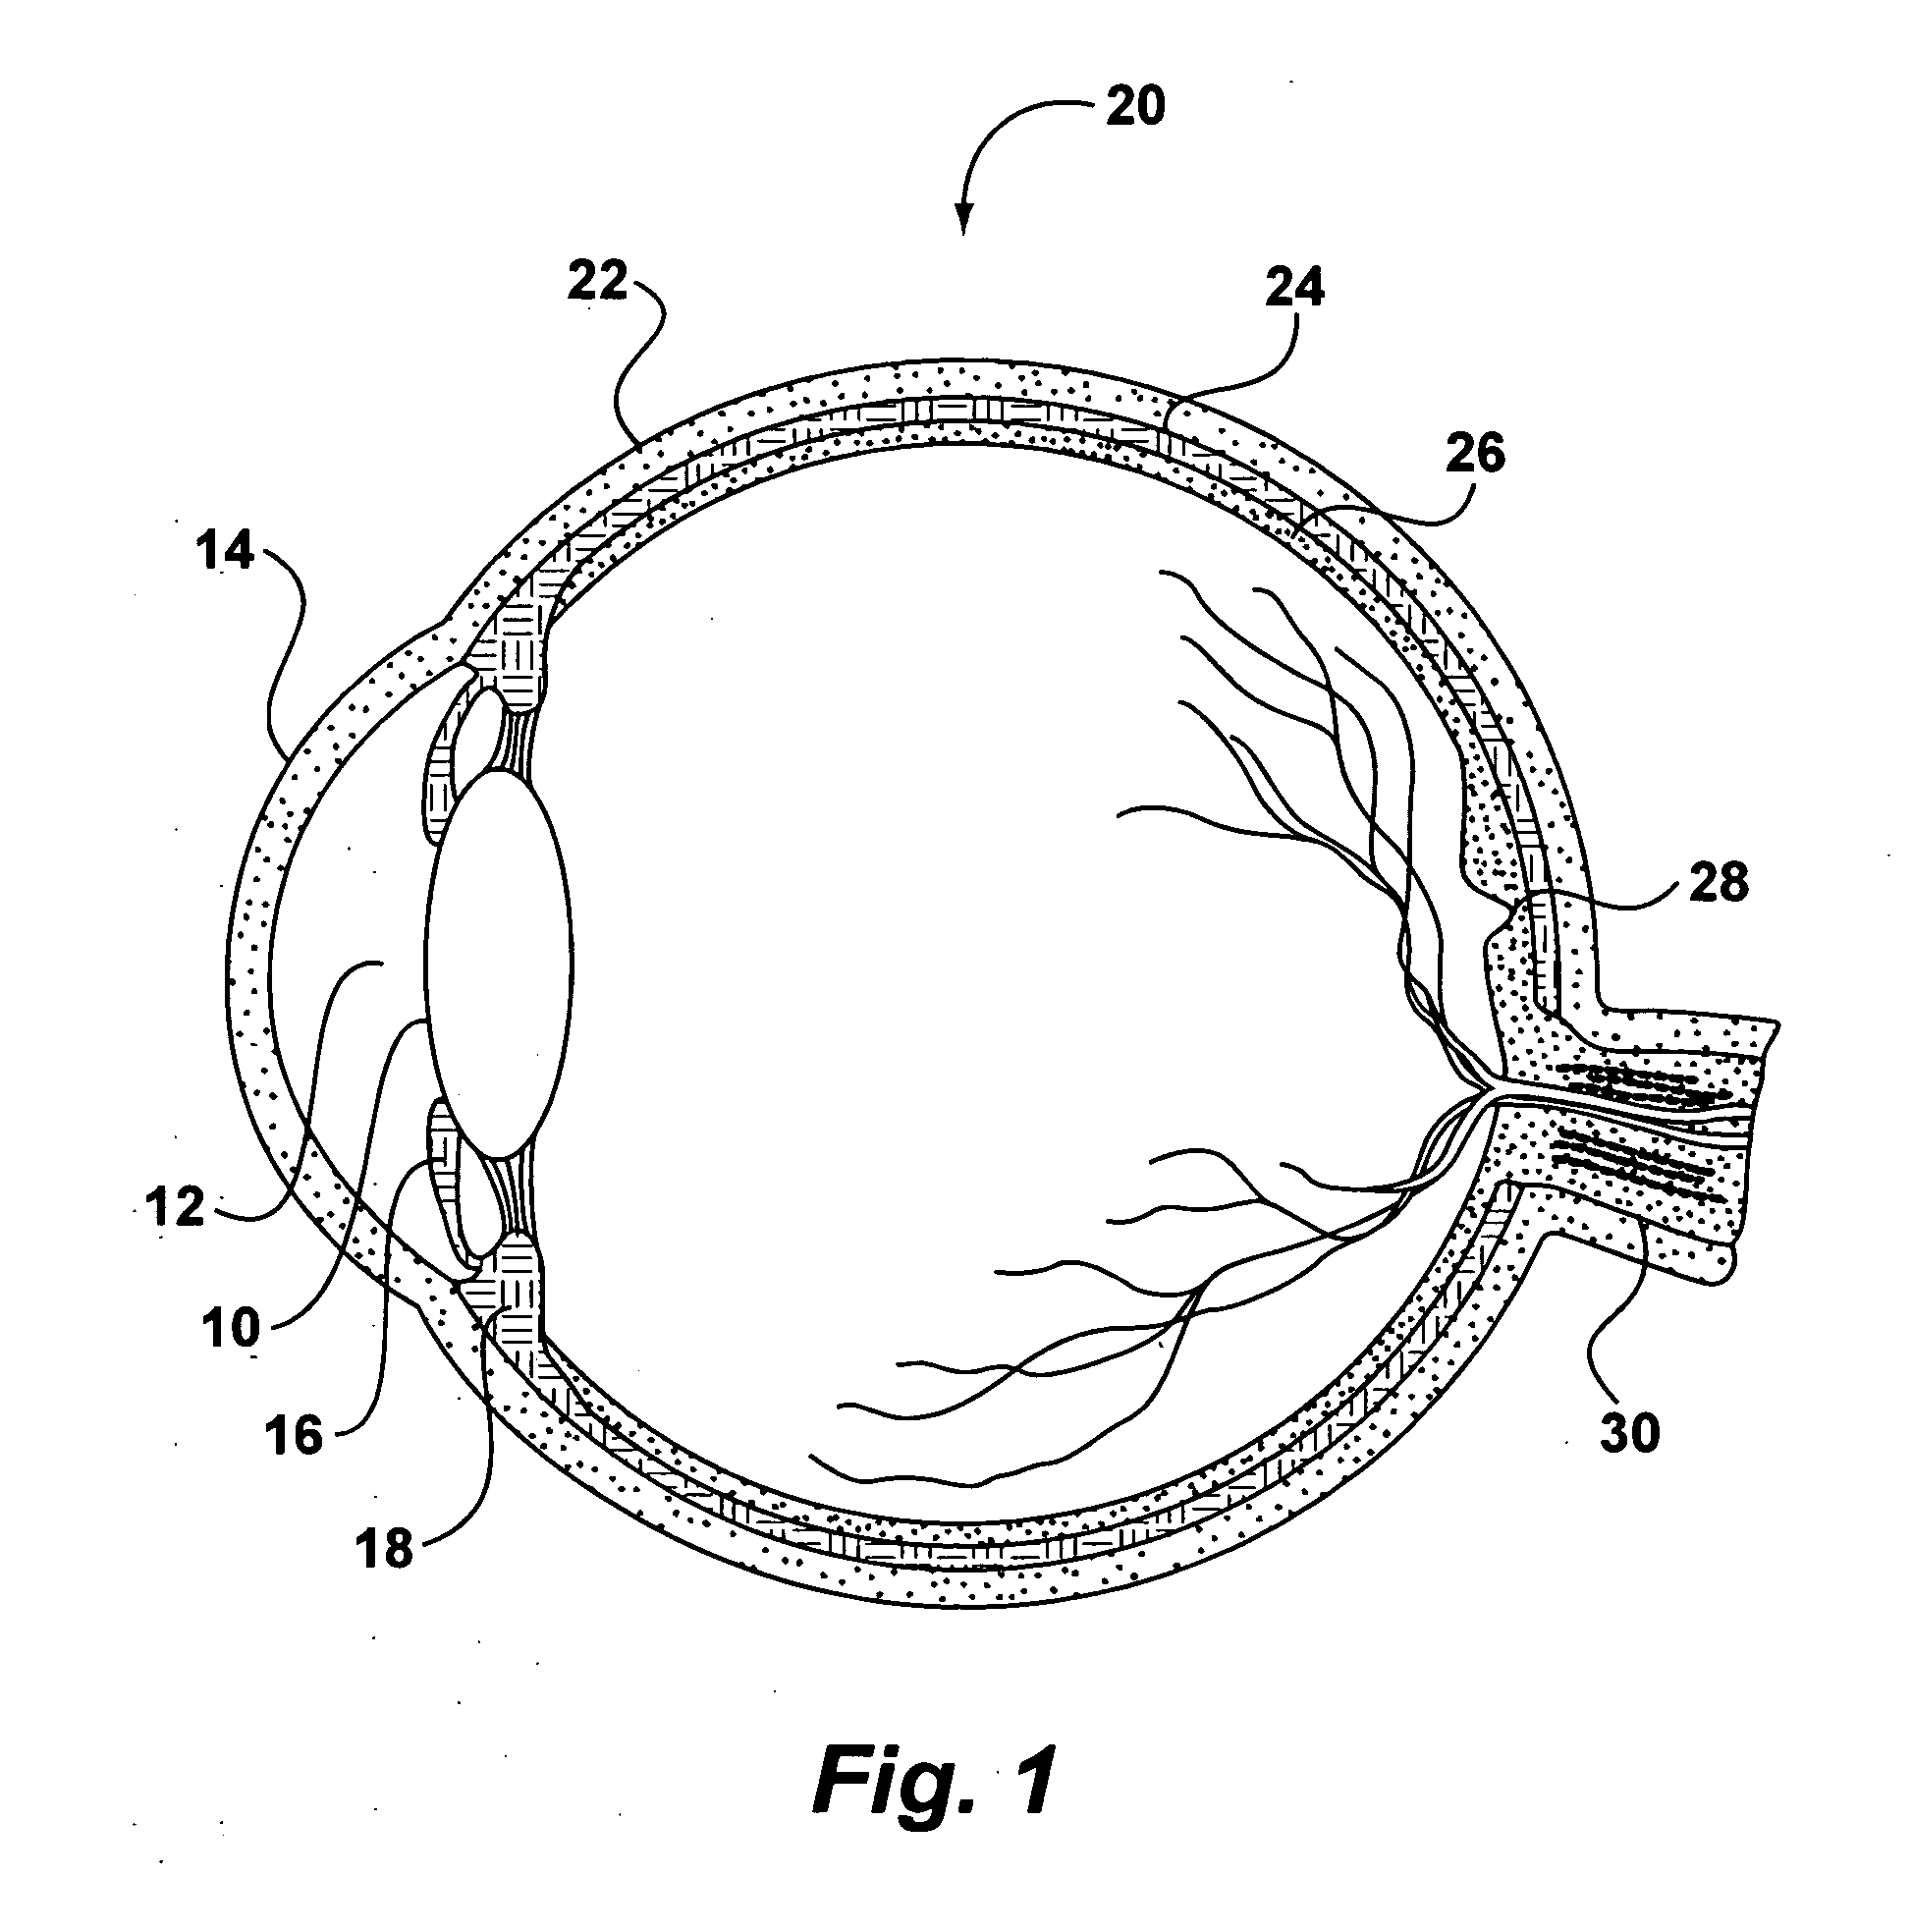 System and method for storing, shipping and injecting ocular devices